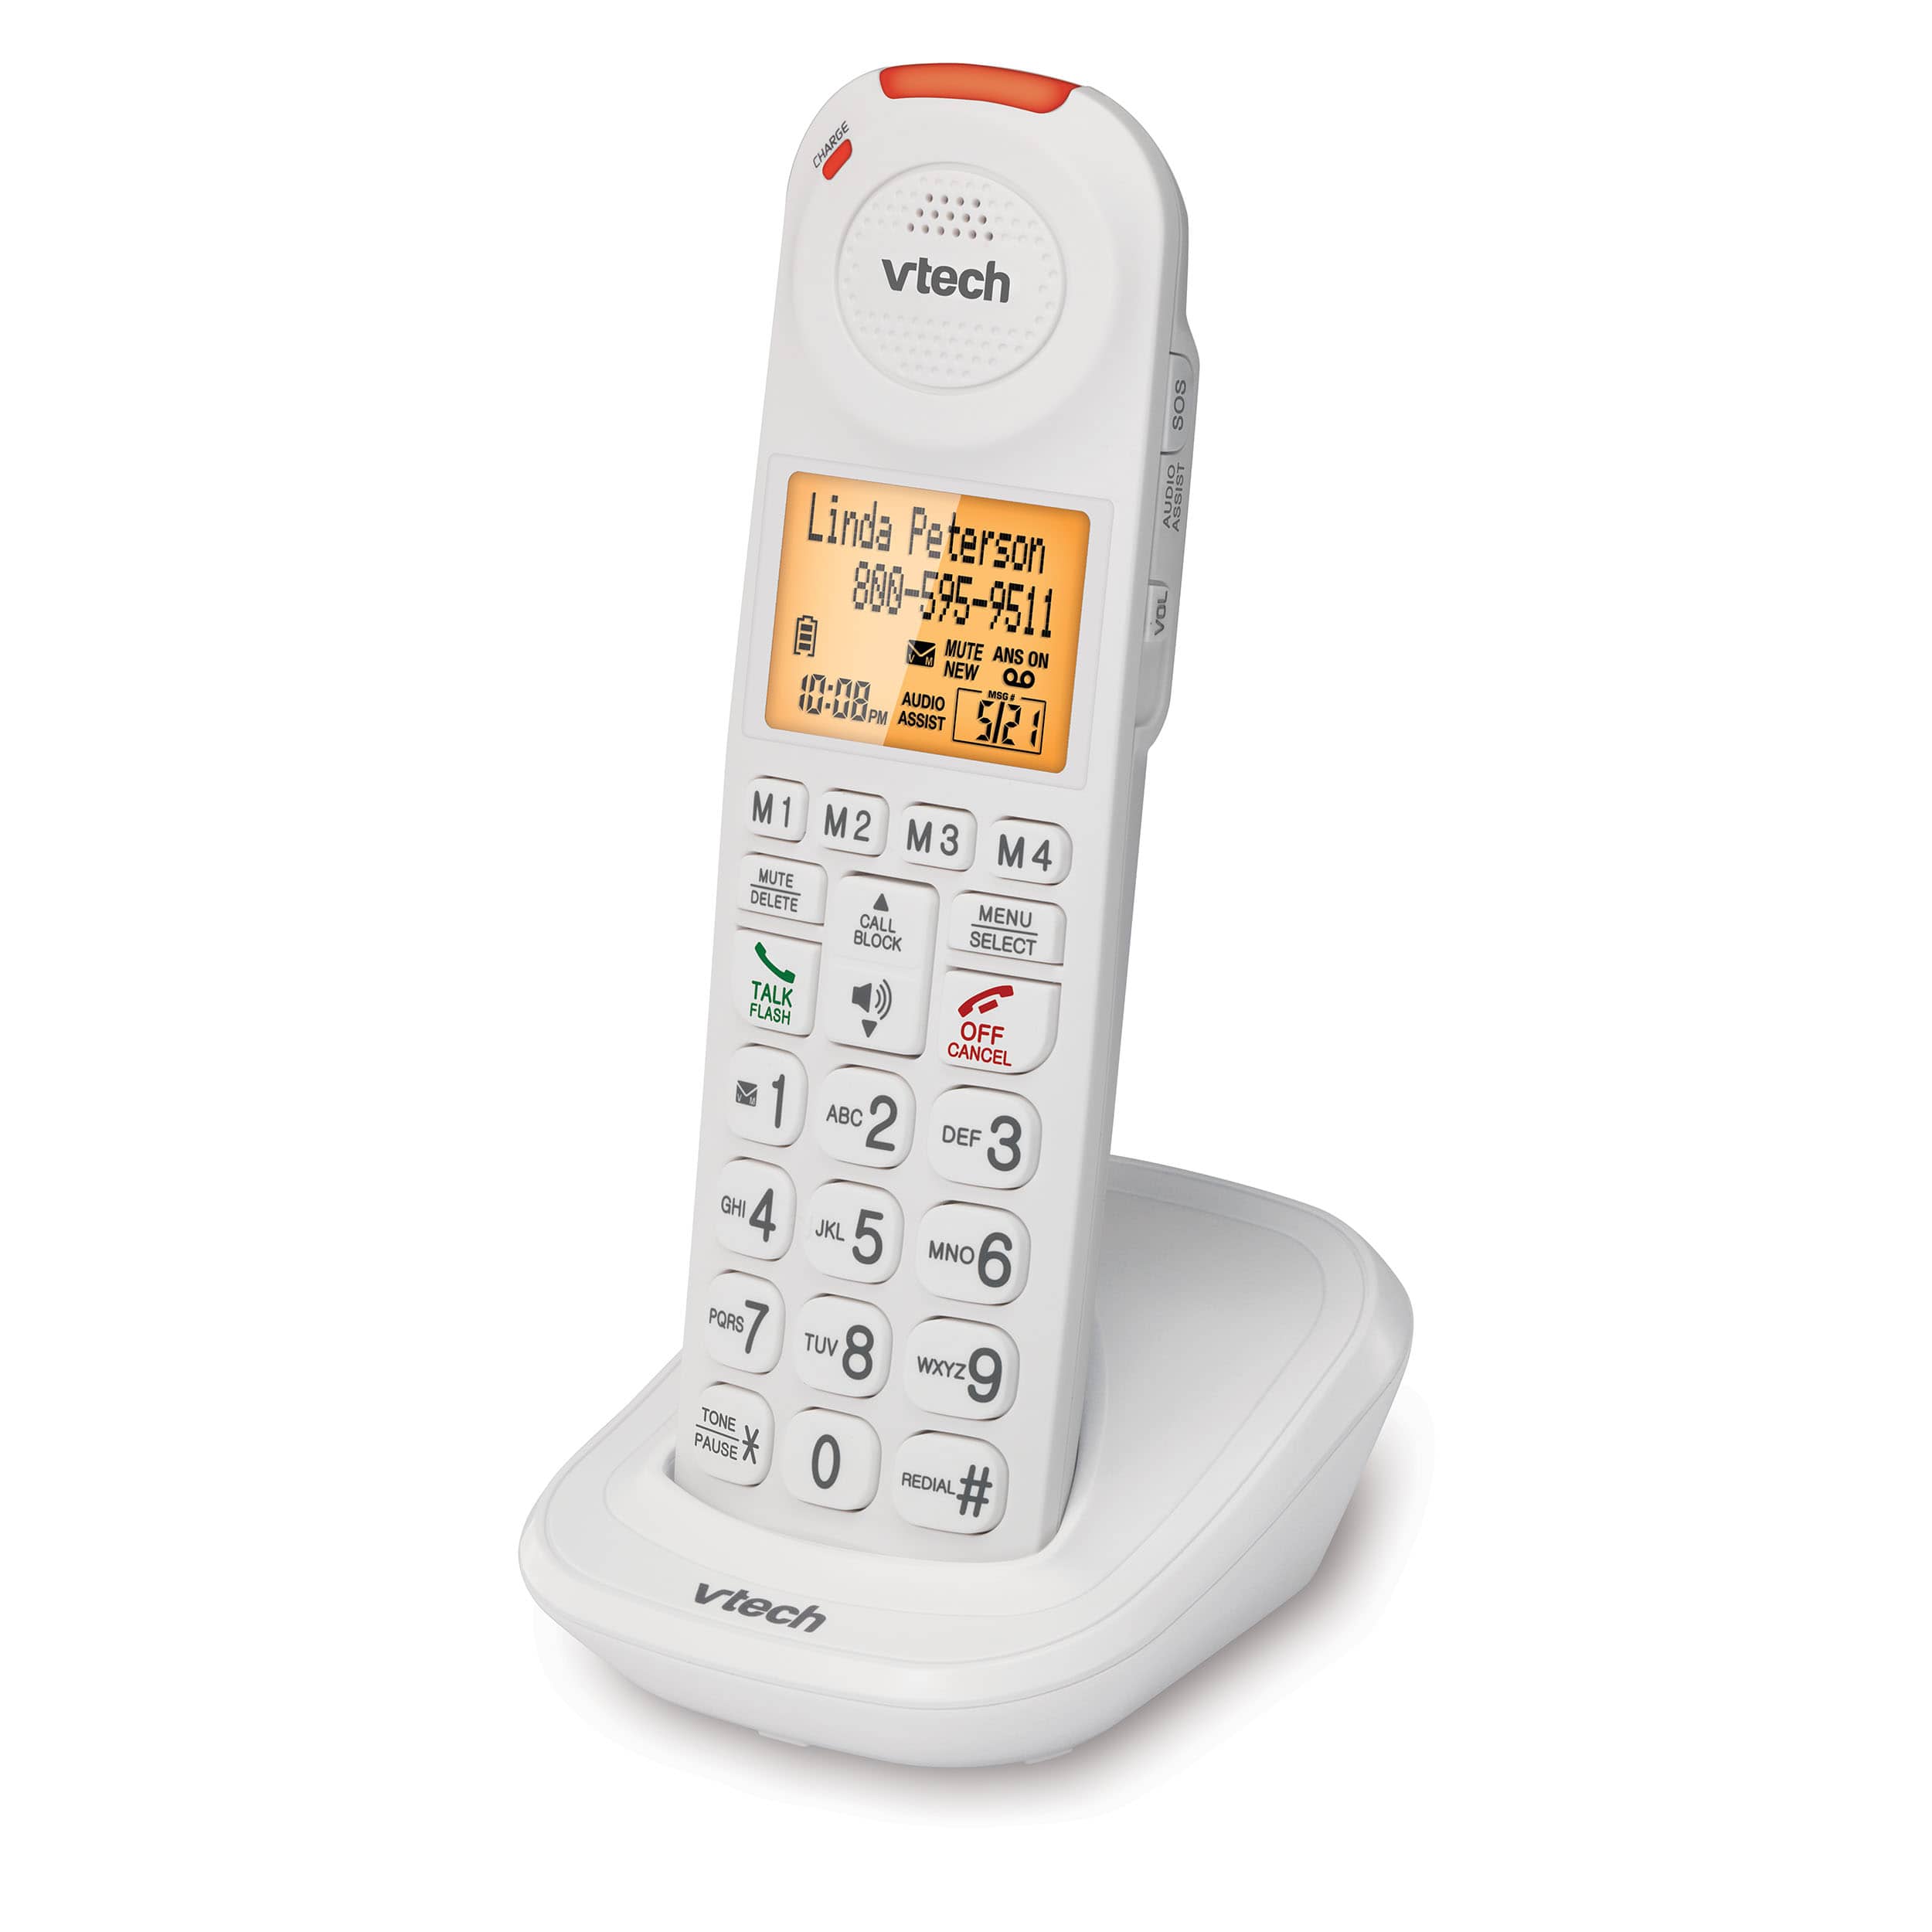 3 Handset Amplified Corded/Cordless Answering System